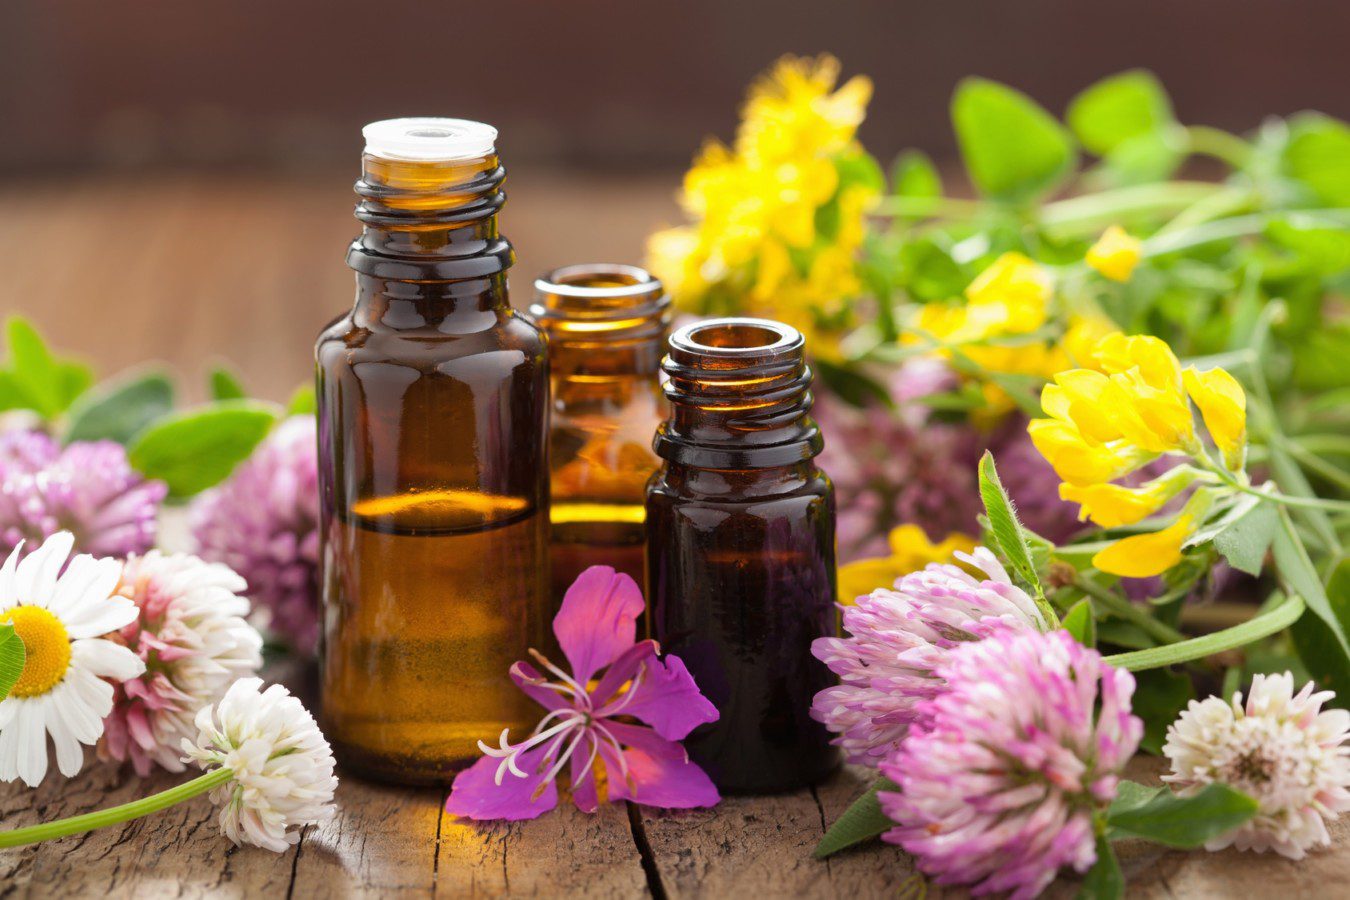 5 Essential Oils That Replace Toxic Cleaning Products